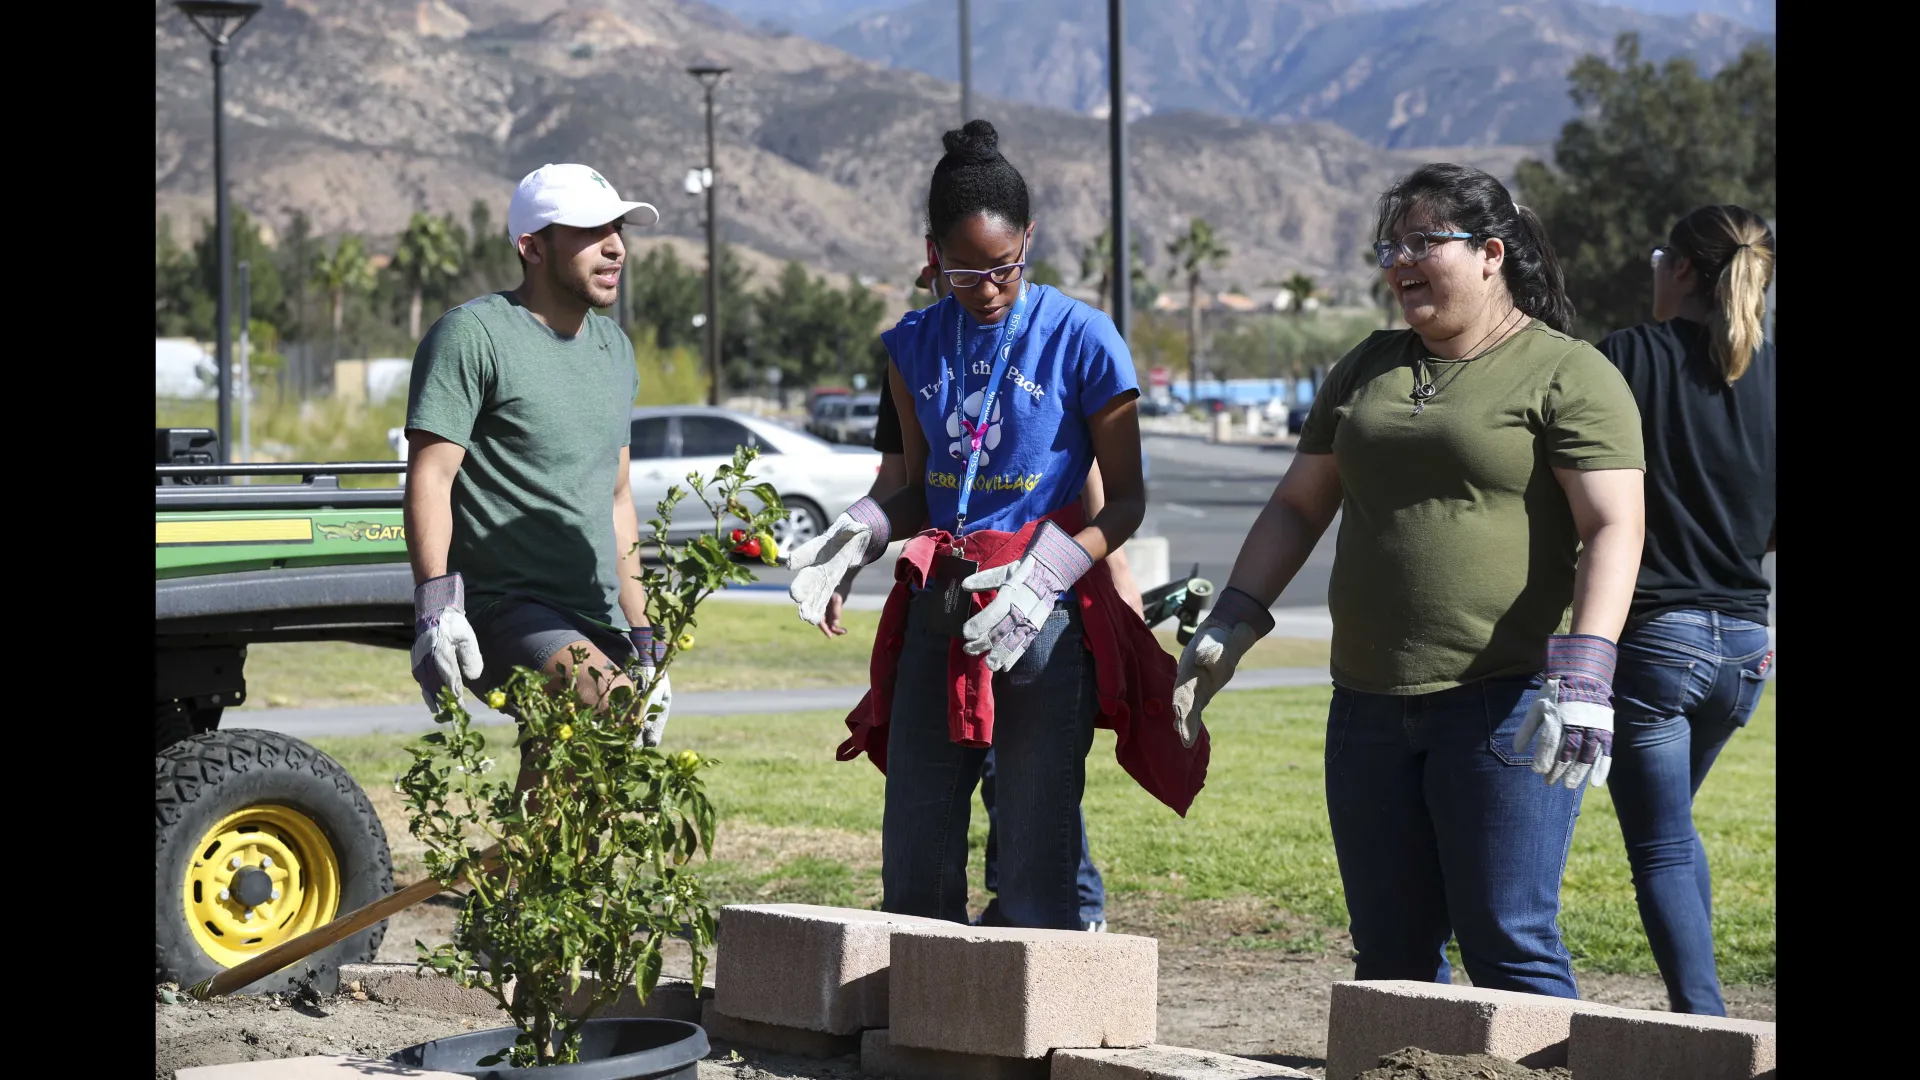 Students planting a tree on campus.